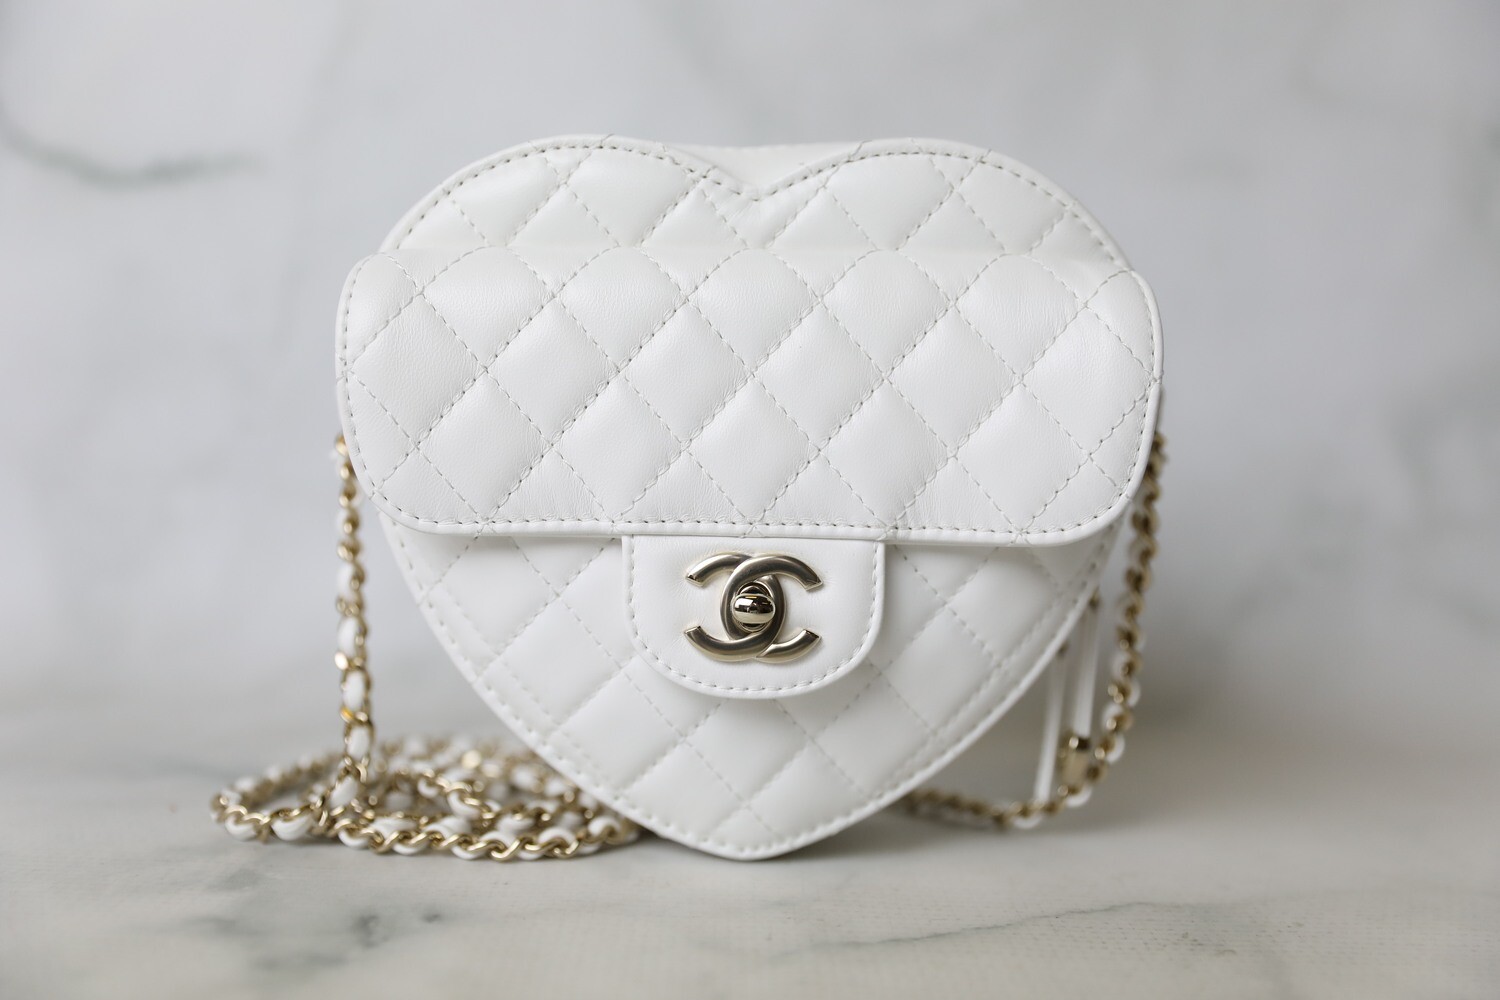 Chanel Heart Bag, Large, White Lambskin Leather, Gold Hardware, New in Box  WA001